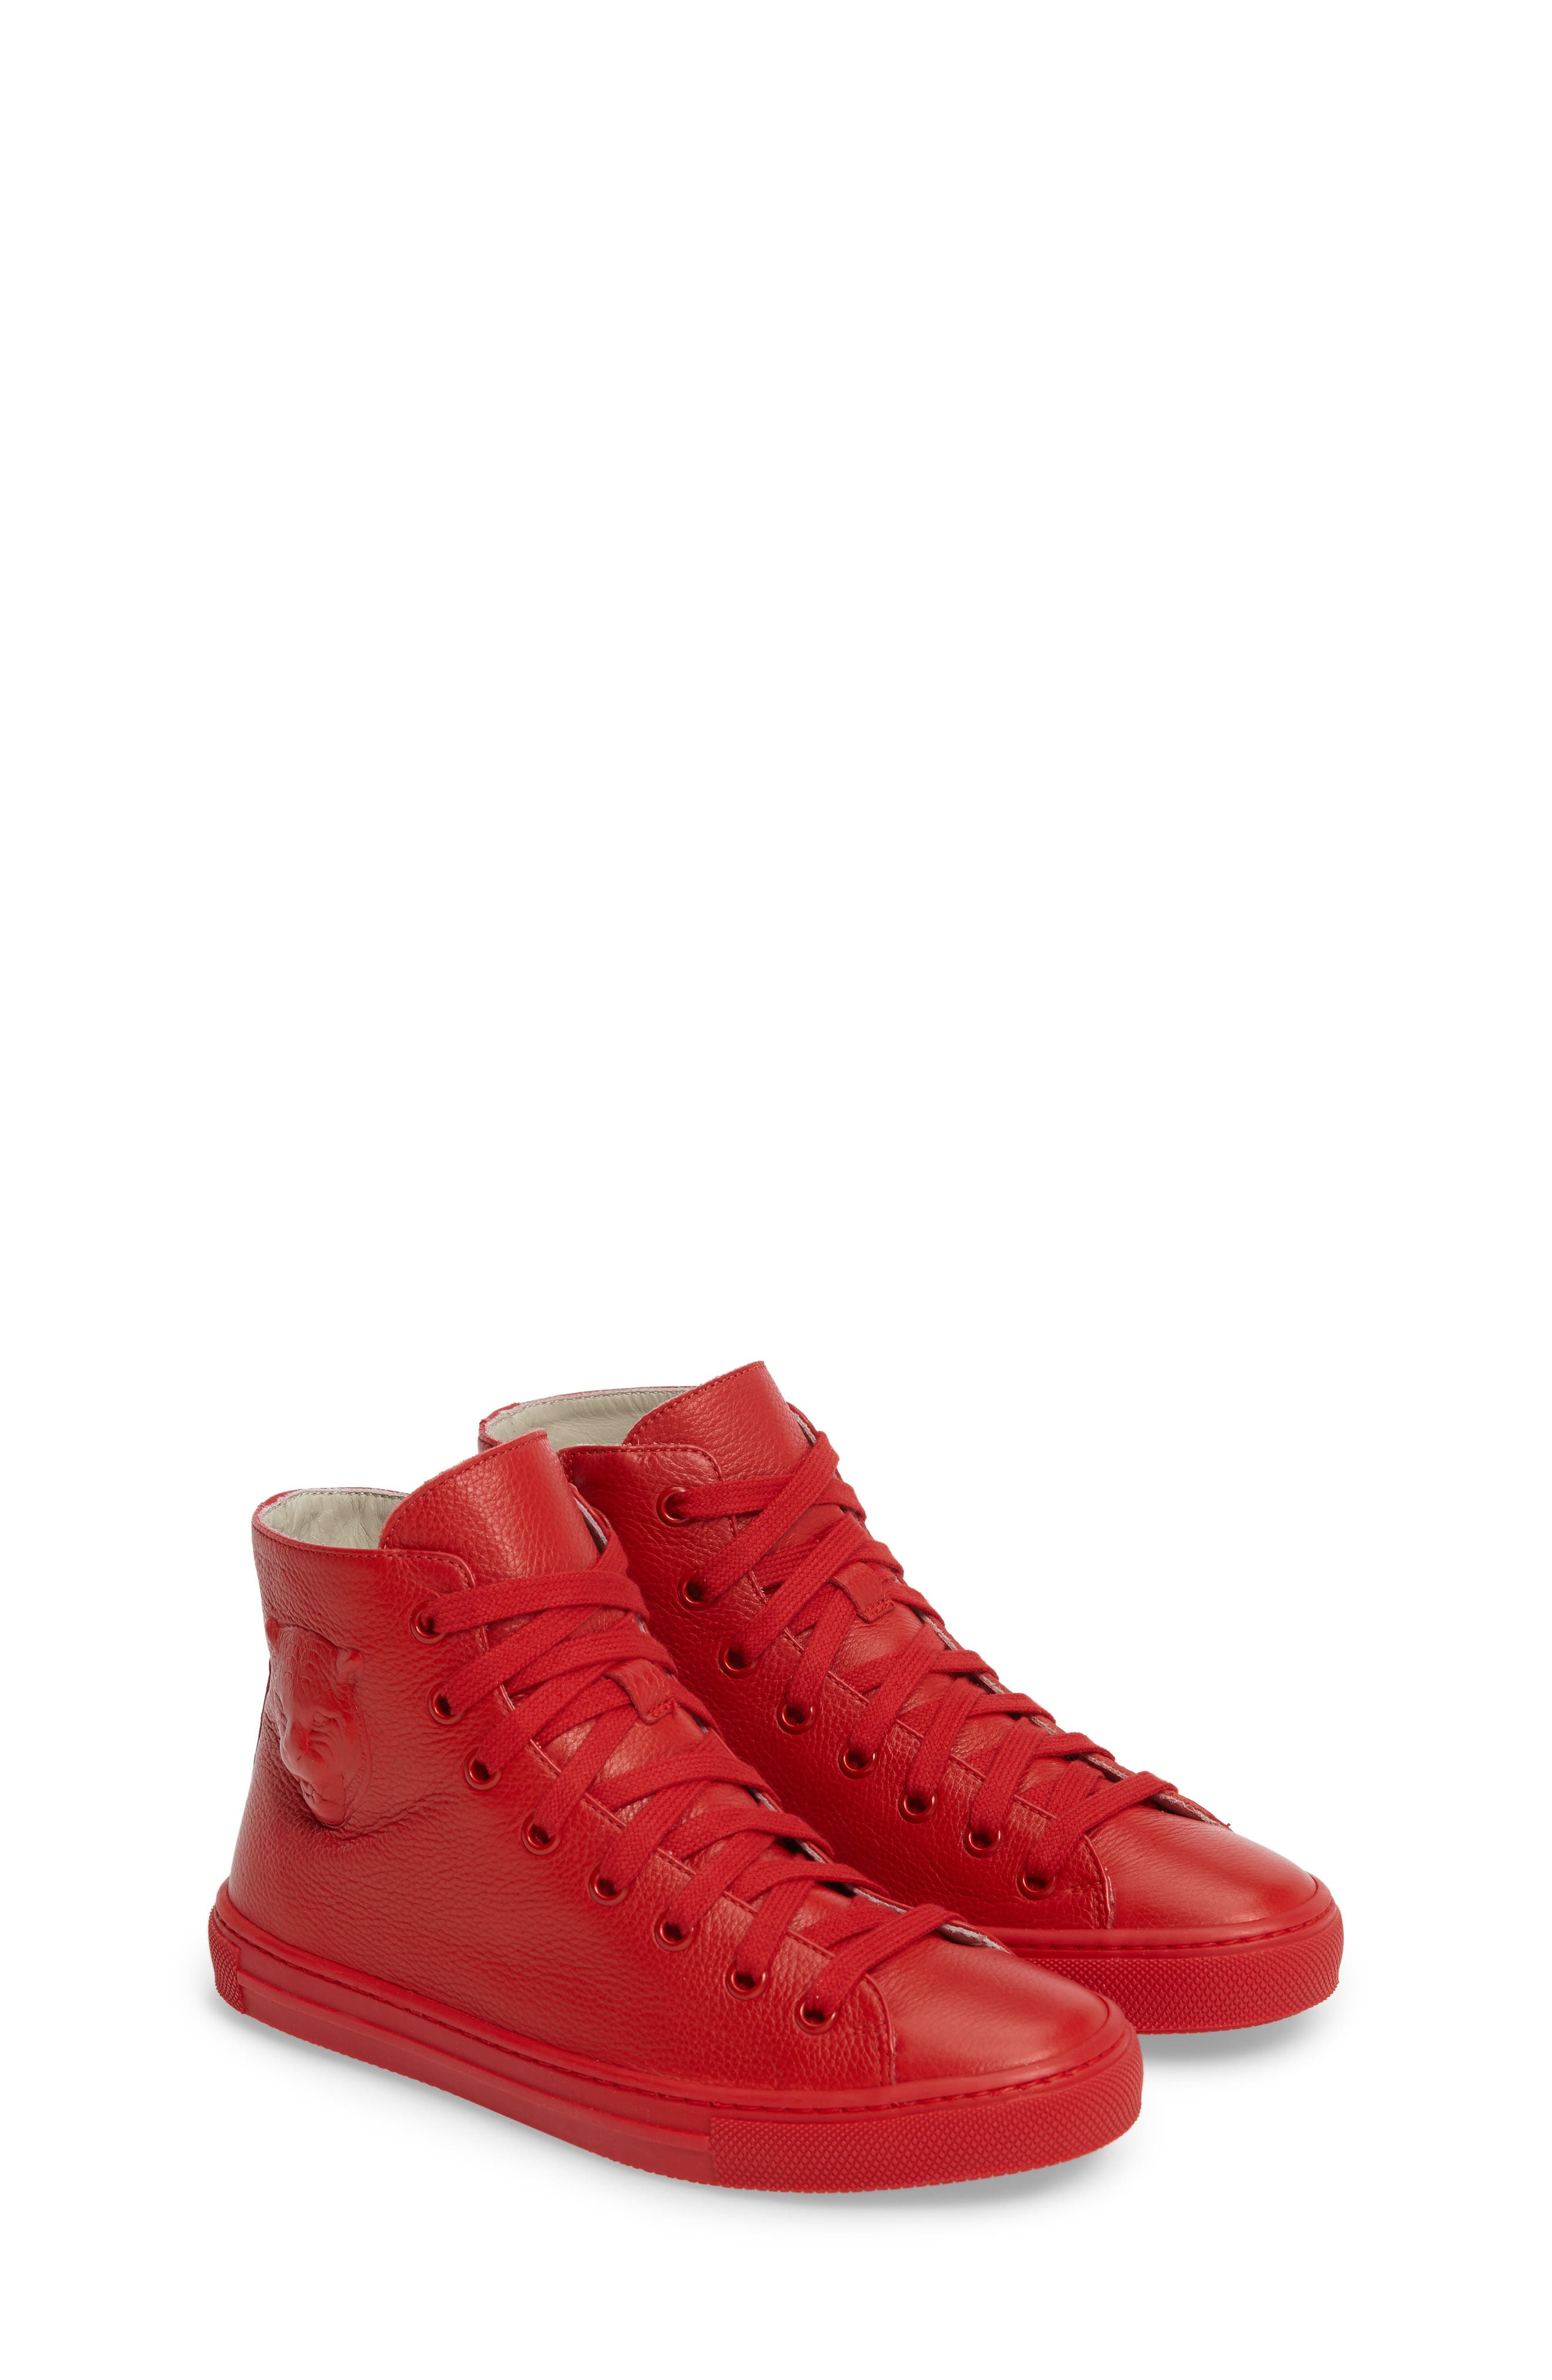 red high top gucci sneakers